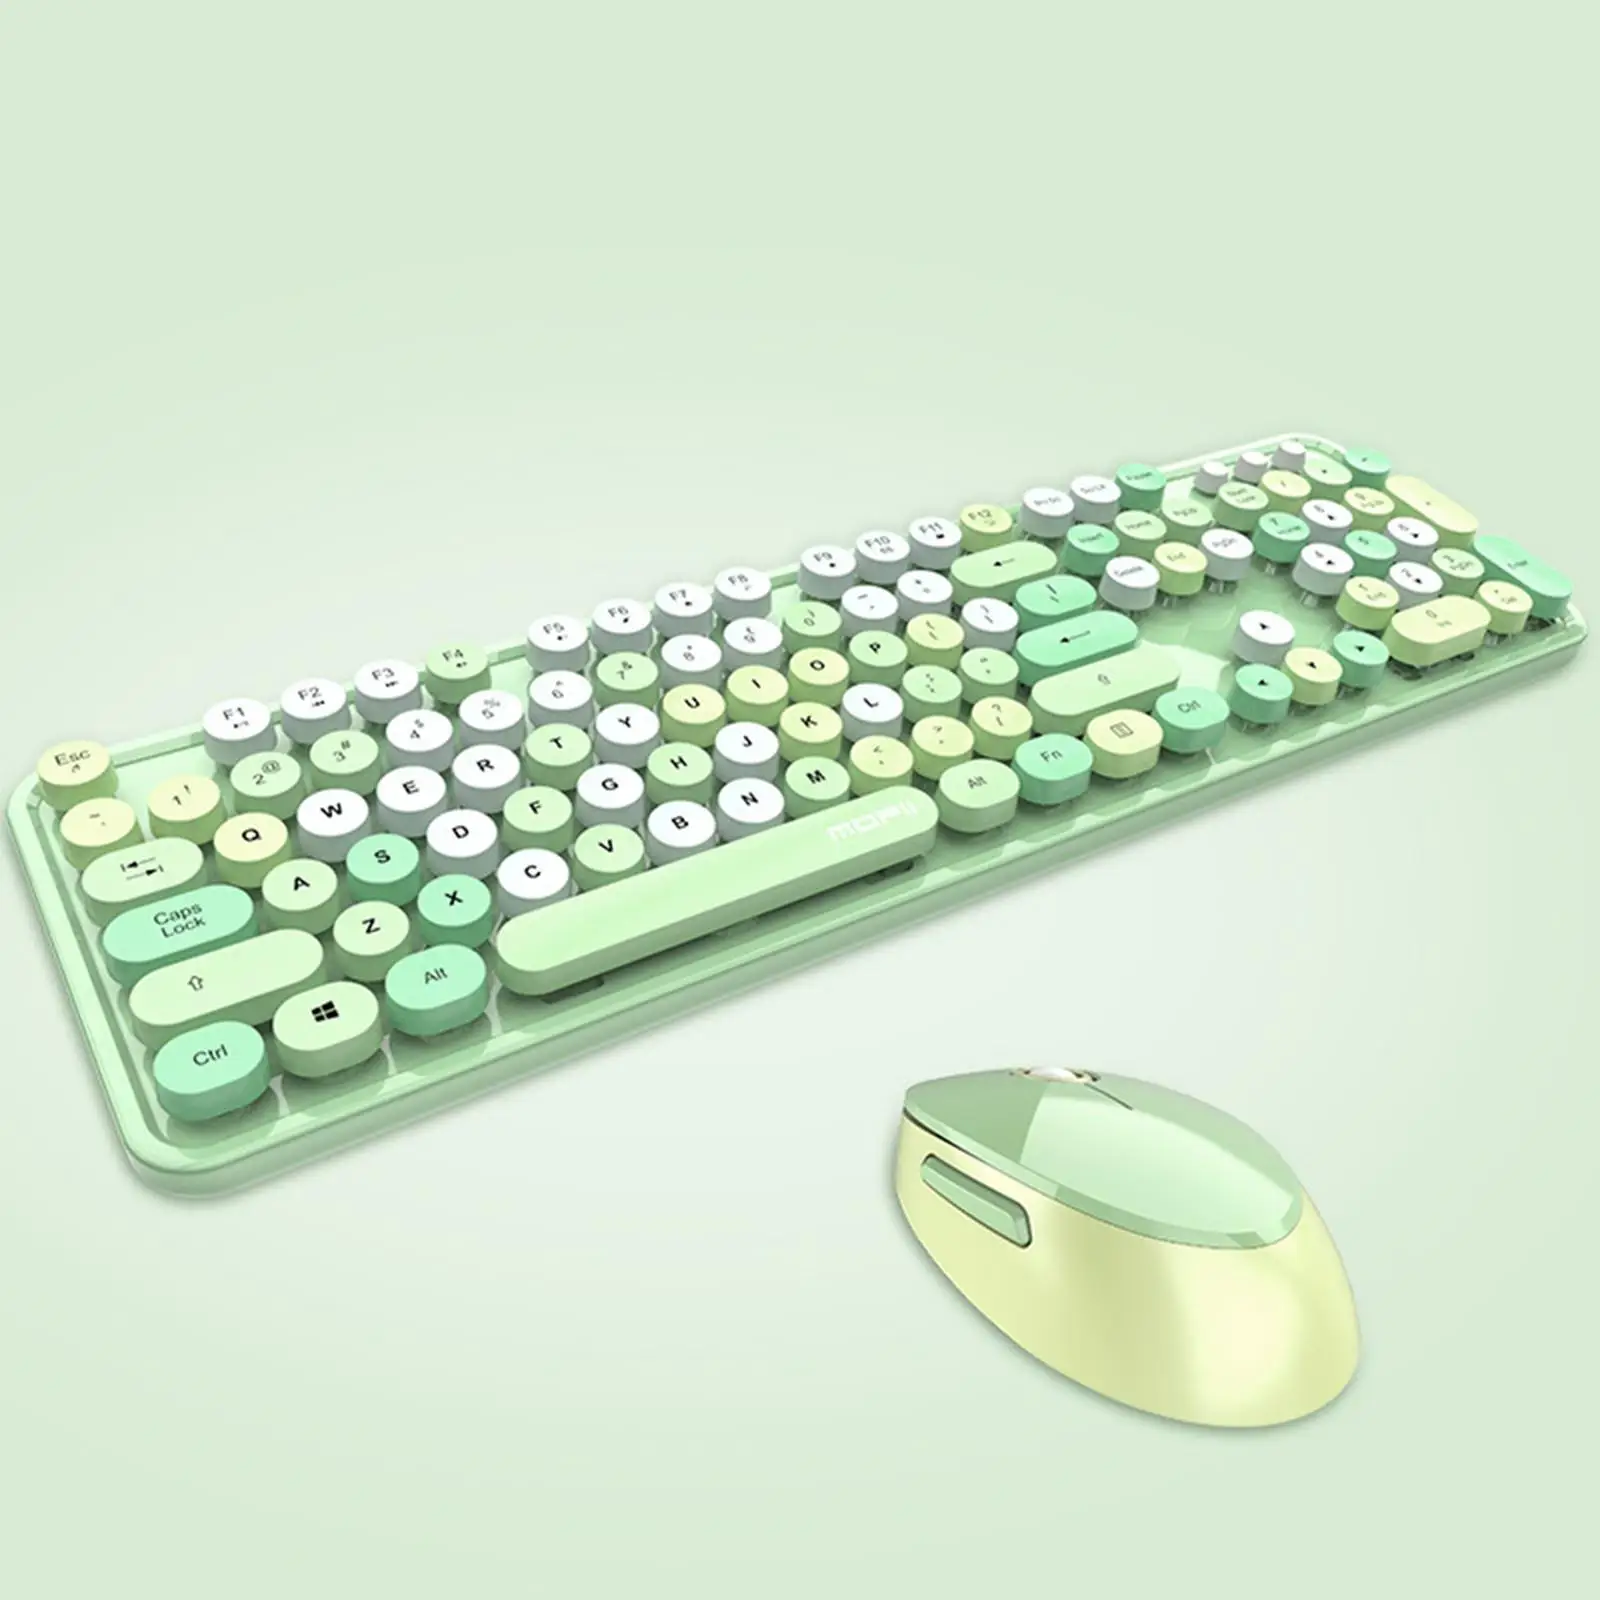  Wireless Keyboard and Mouse Kit Plug and Play, Silent click